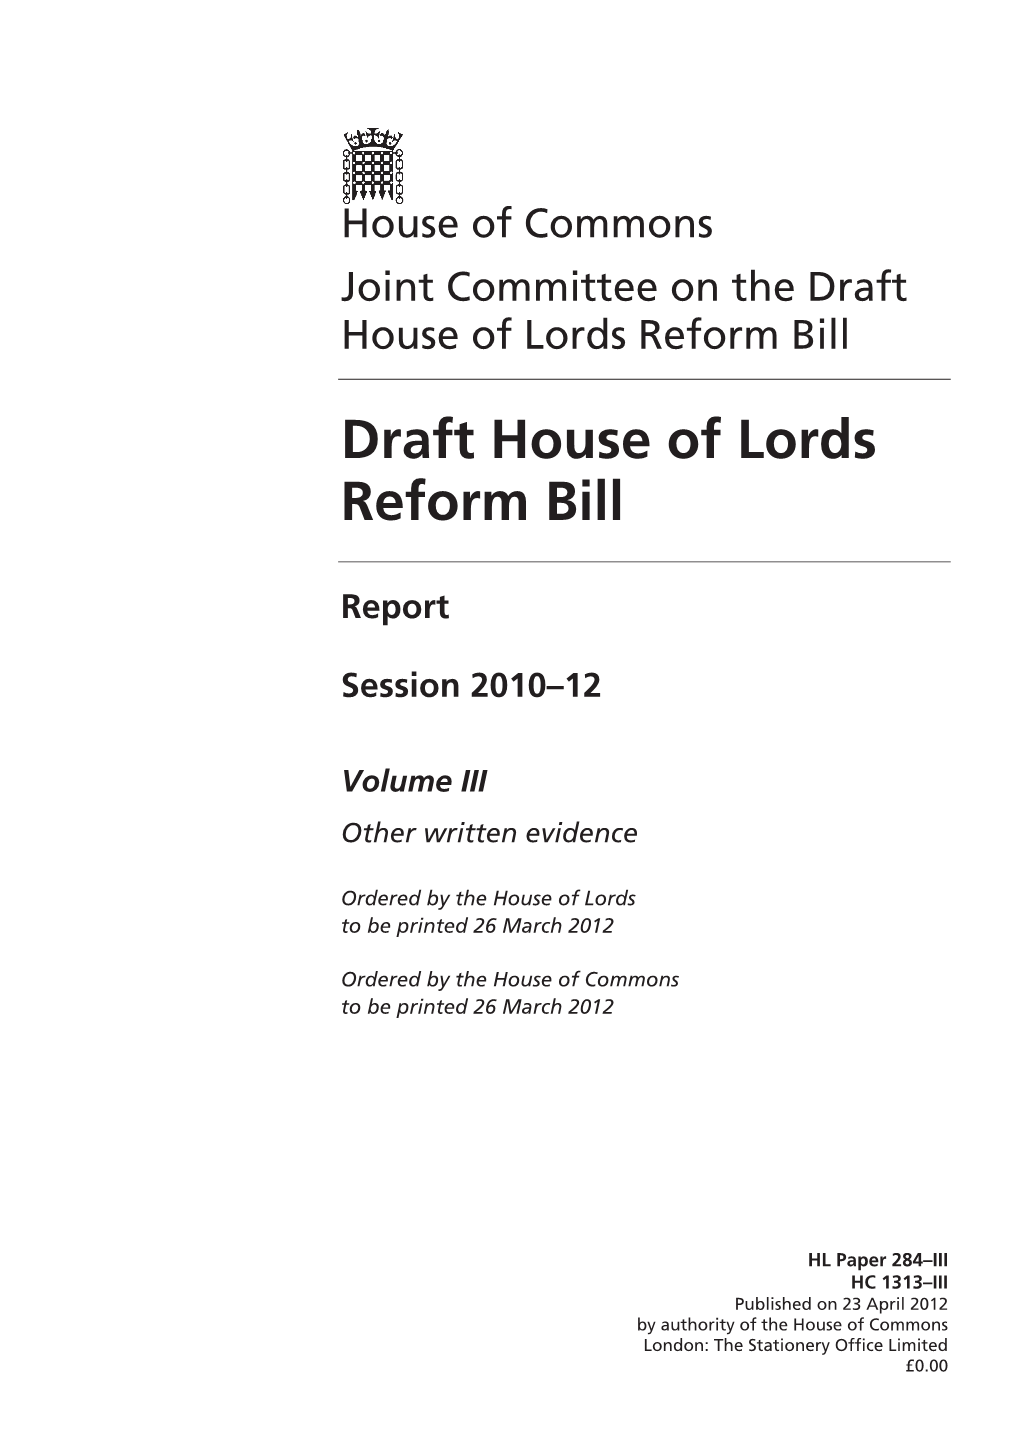 Draft House of Lords Reform Bill